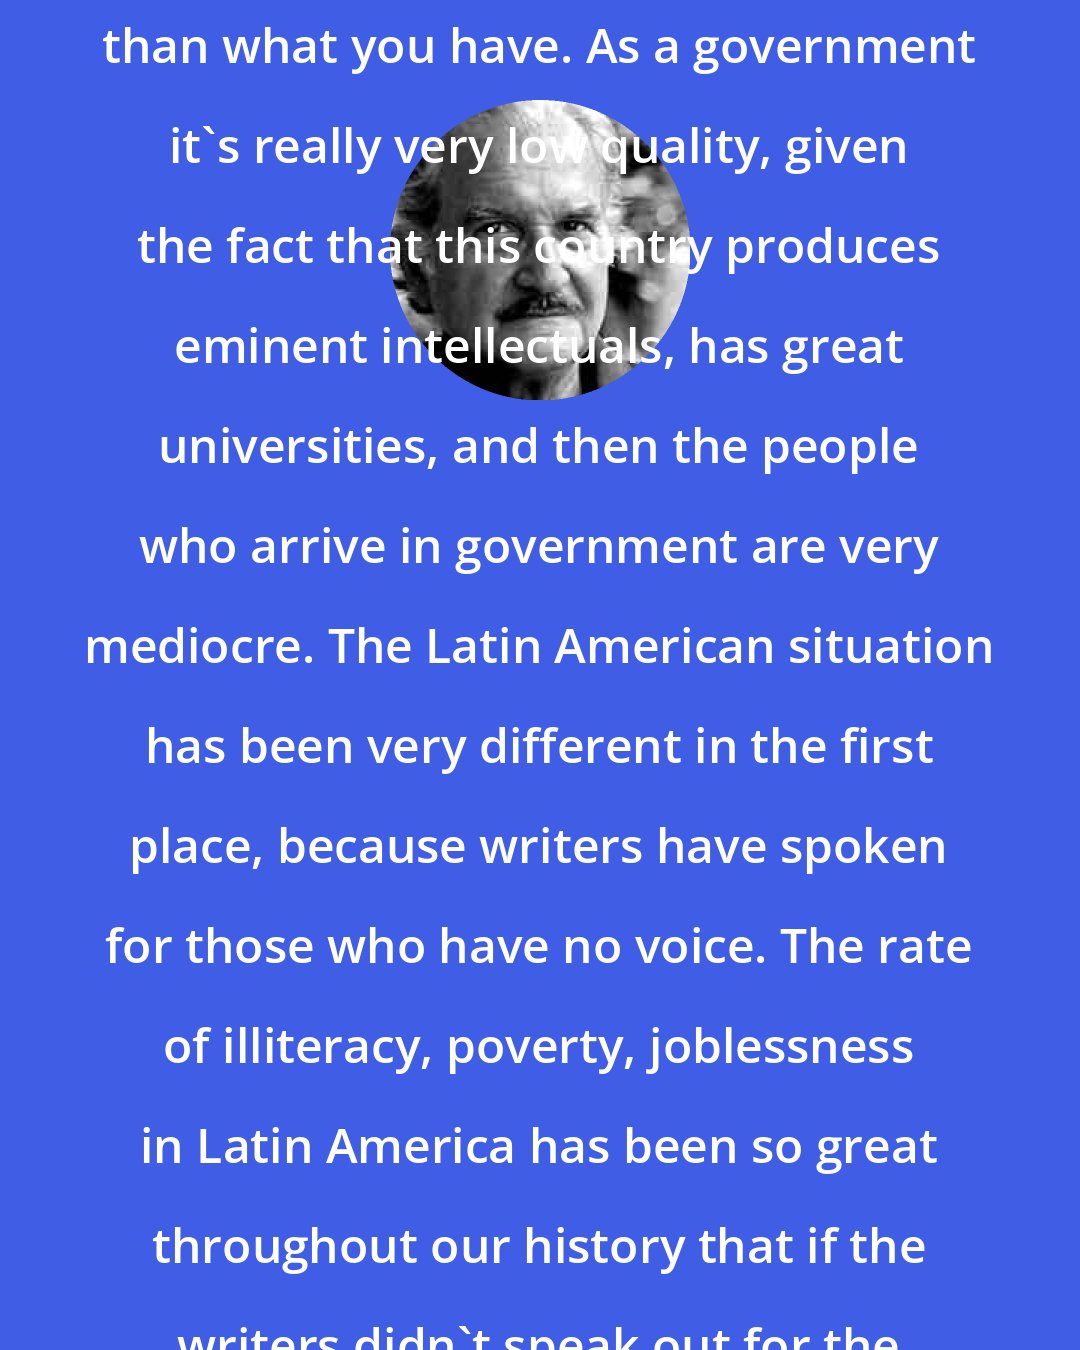 Carlos Fuentes: Anything would be better in the US than what you have. As a government it's really very low quality, given the fact that this country produces eminent intellectuals, has great universities, and then the people who arrive in government are very mediocre. The Latin American situation has been very different in the first place, because writers have spoken for those who have no voice. The rate of illiteracy, poverty, joblessness in Latin America has been so great throughout our history that if the writers didn't speak out for the people, nobody would.